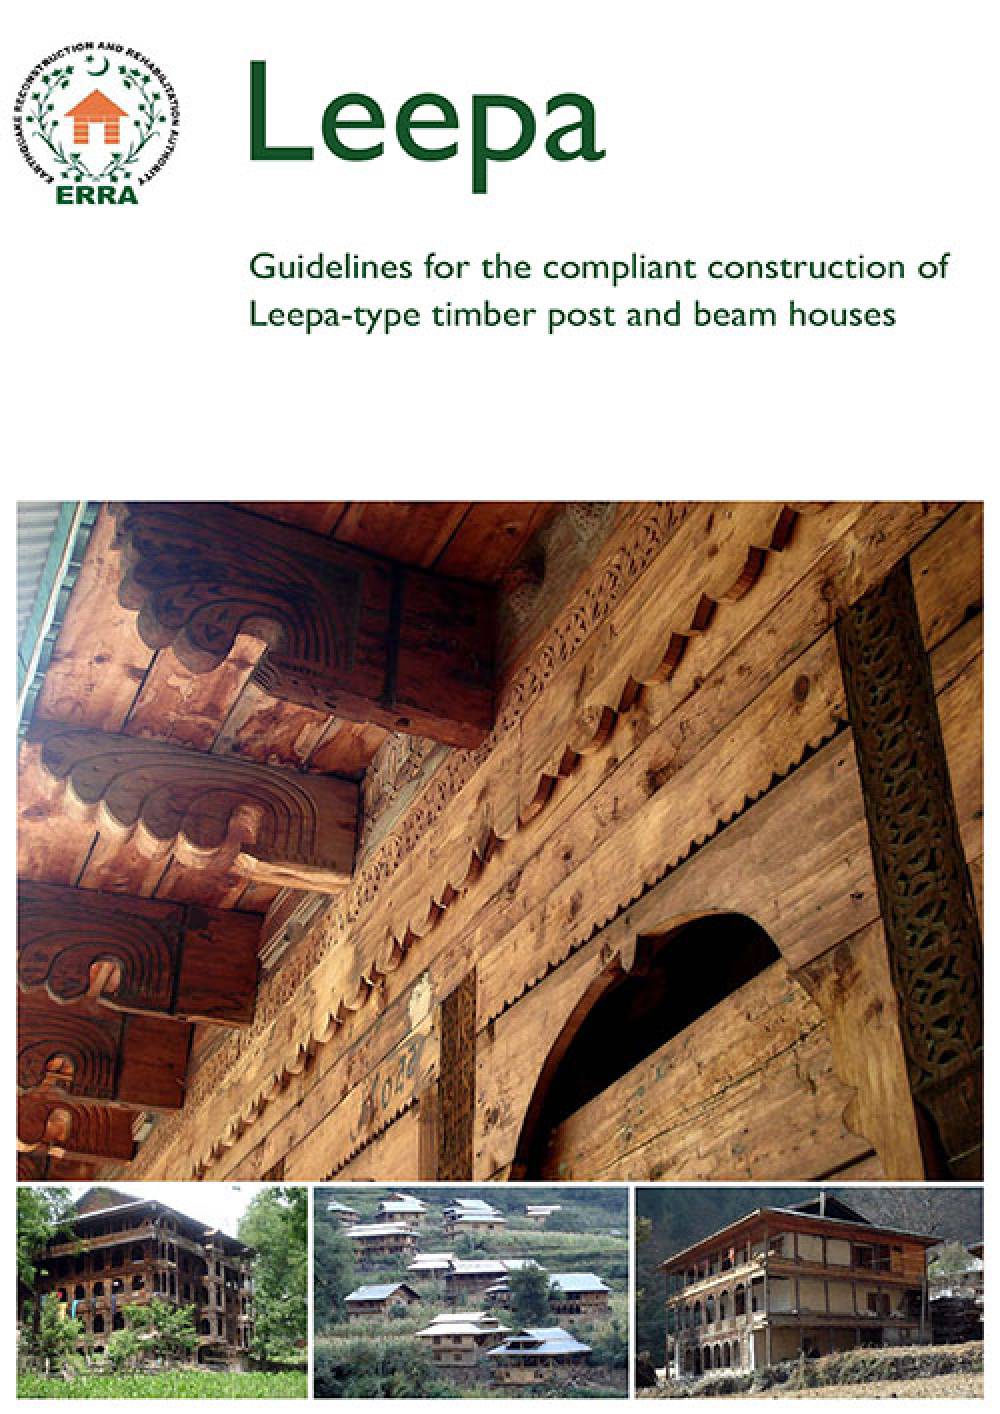 Leepa Guidelines for the Compliant Construction of Leepa-type Timber Post and Beam Houses